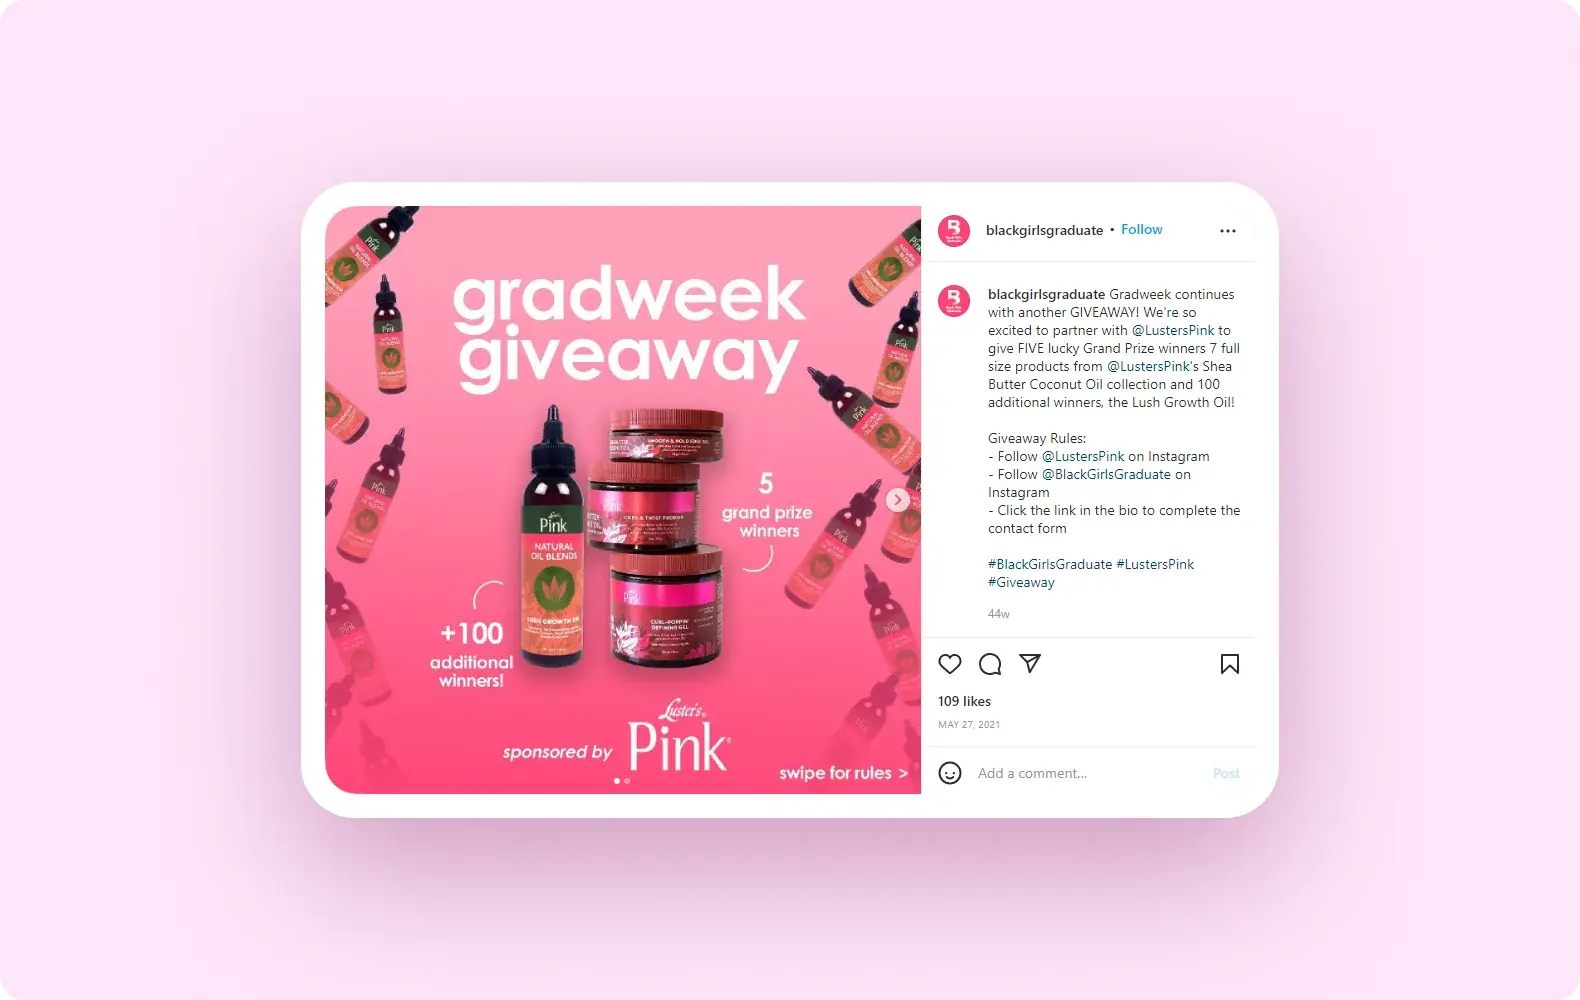 Image of an Instagram giveaway.